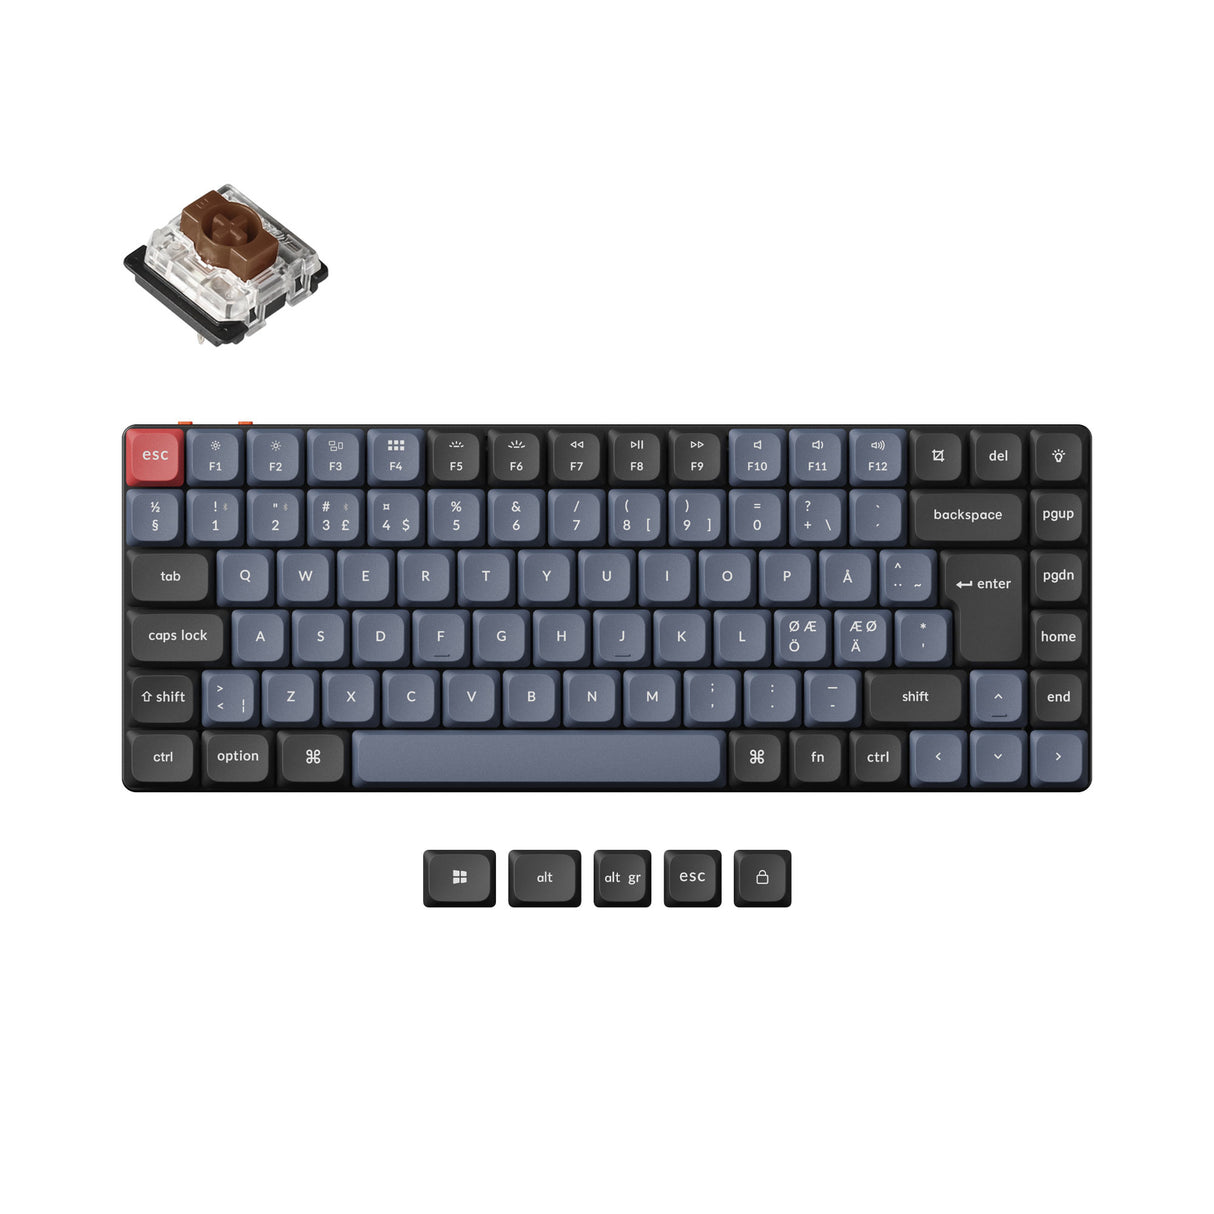 Keychron K3 Pro QMK VIA low profile custom mechanical keyboard 75 percent layout PBT Keycaps hot-swappable Gateron low profile switch brown ISO Nordic layout